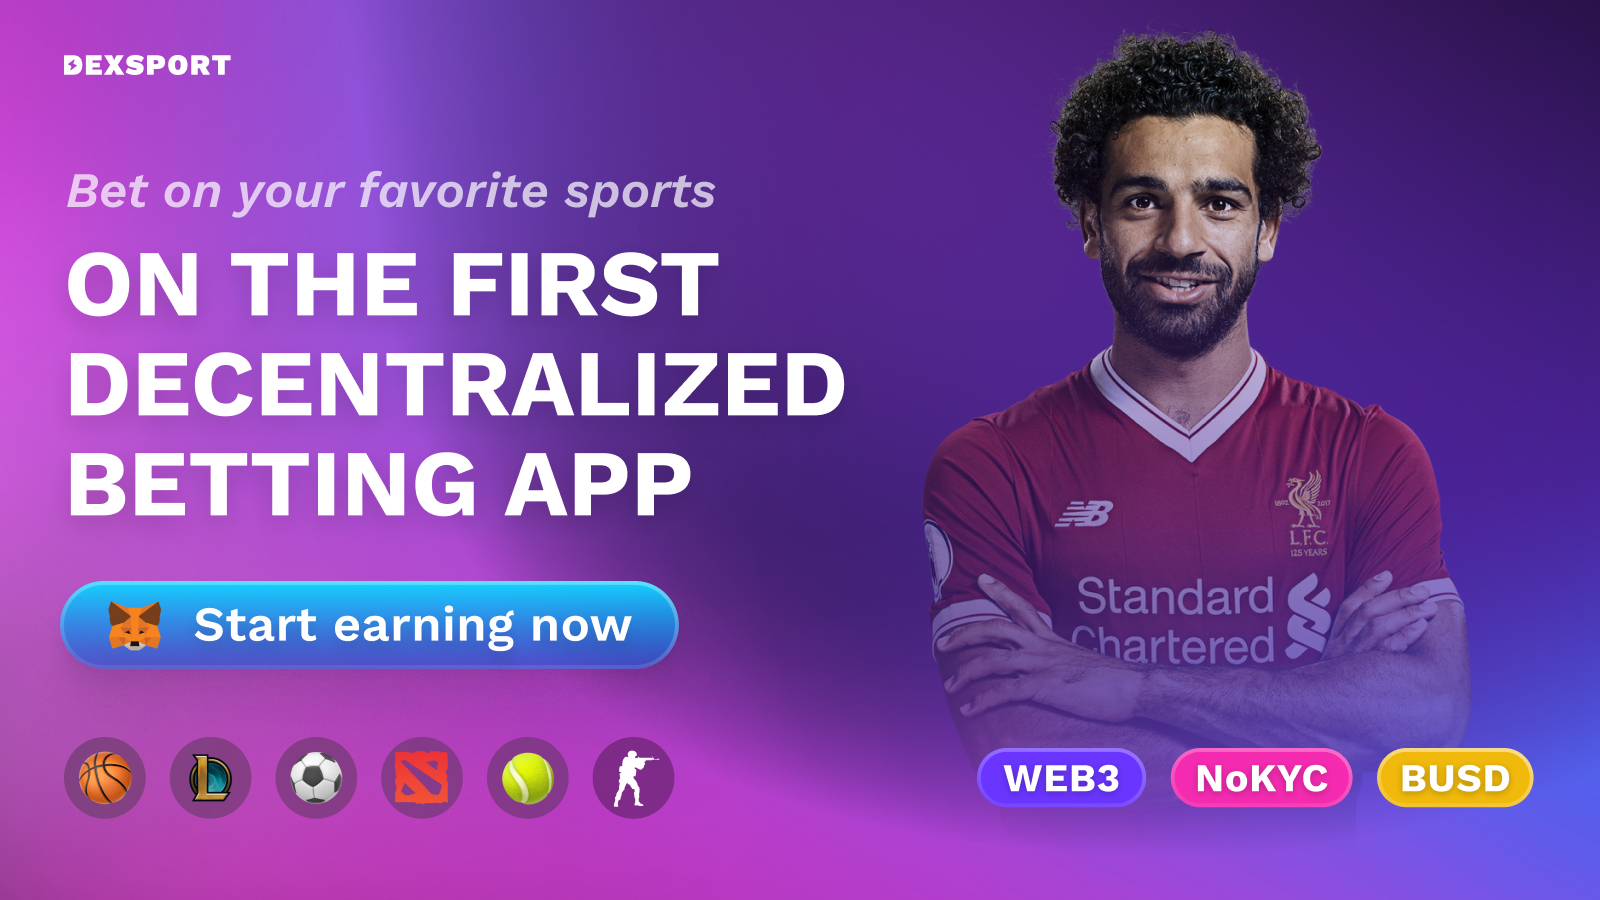 Making Money with Betting Has Never Been so Easy: Dexsport Is Changing the Gaming Landscape with the Help of DeFi and NFT